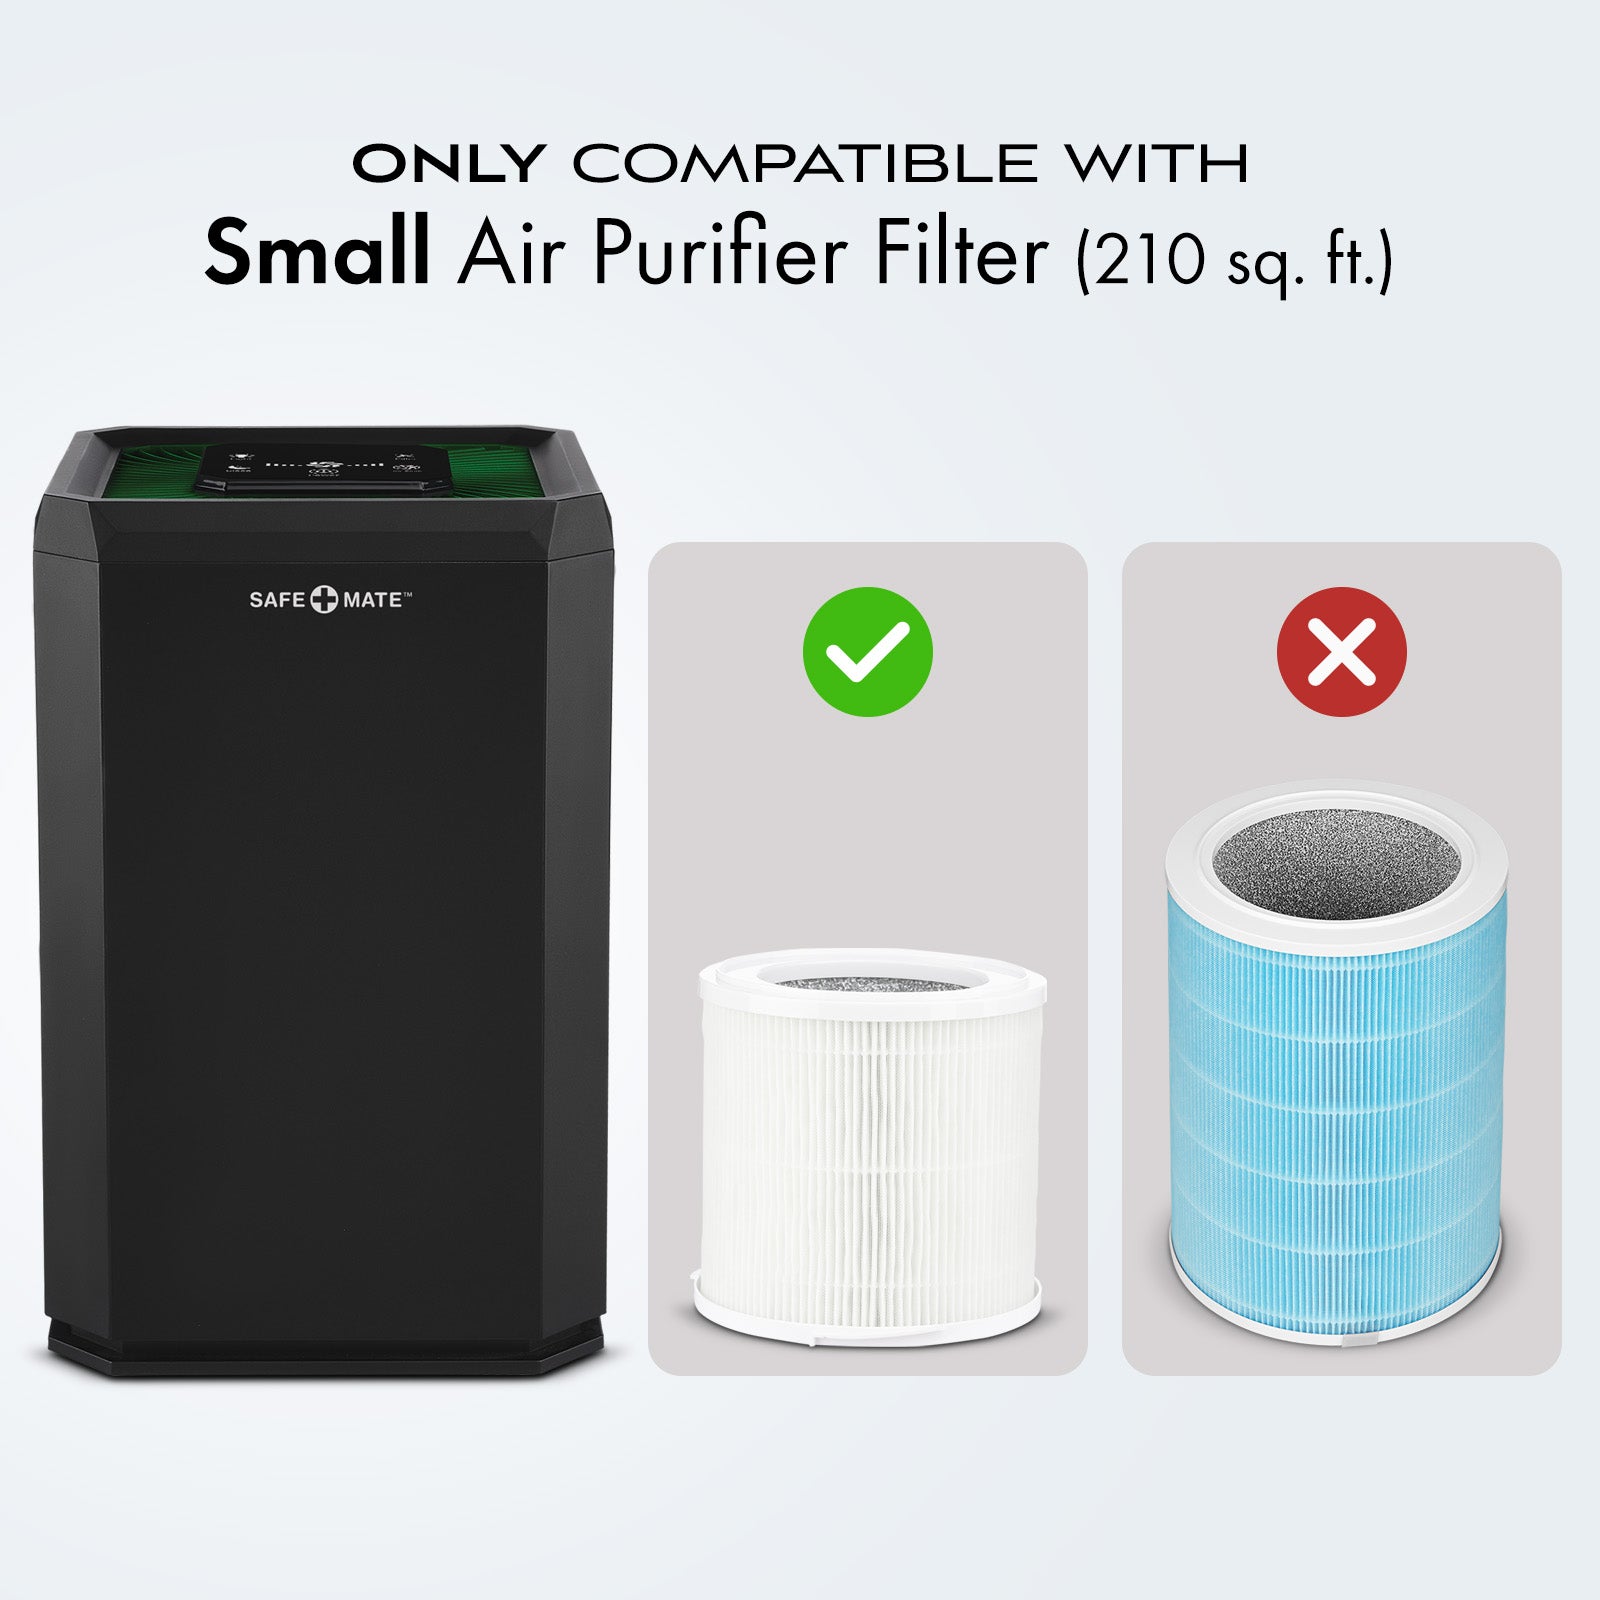 Only Compatible with Small Air Purifier (210 ft.)